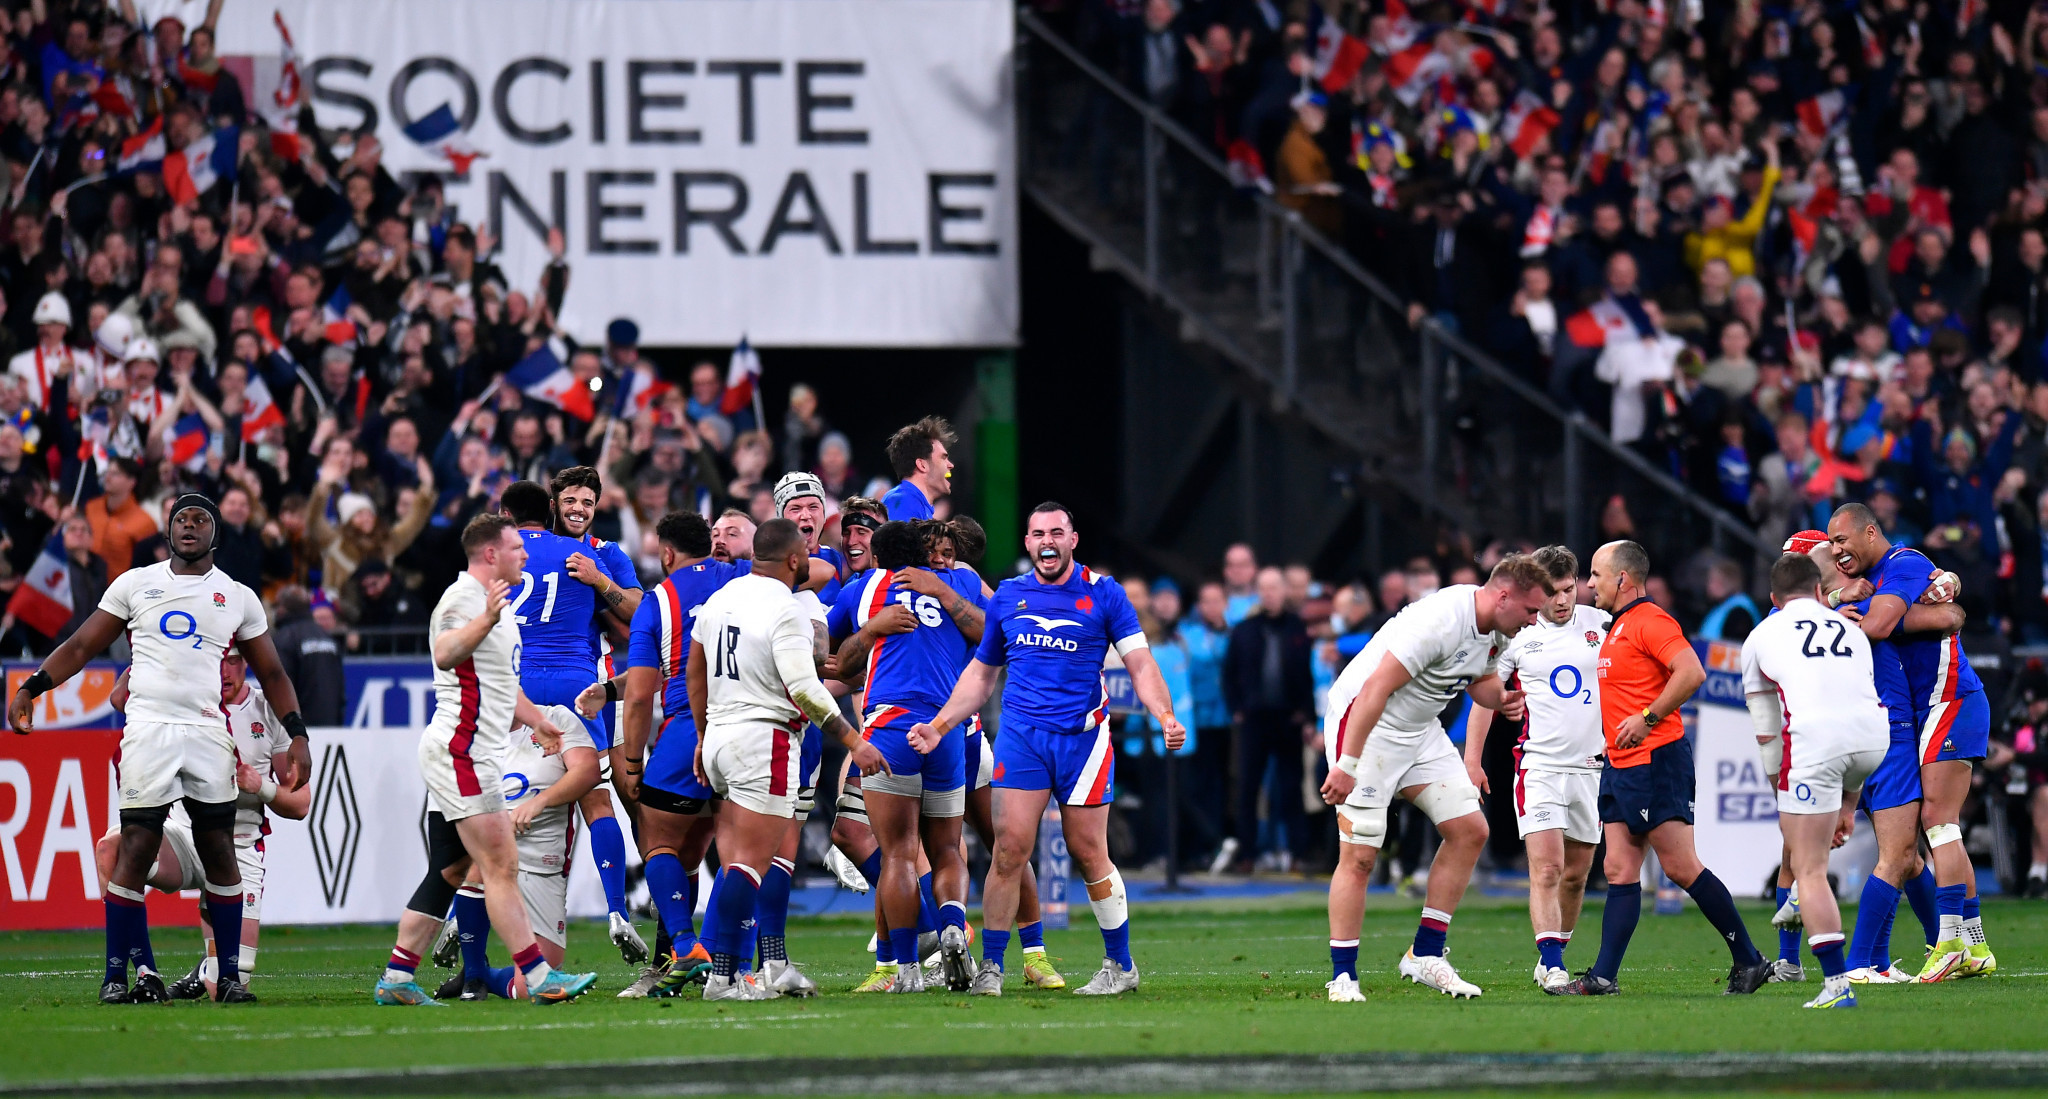 France is due to stage next year's men's 15-a-side rugby union World Cup ©Getty Images